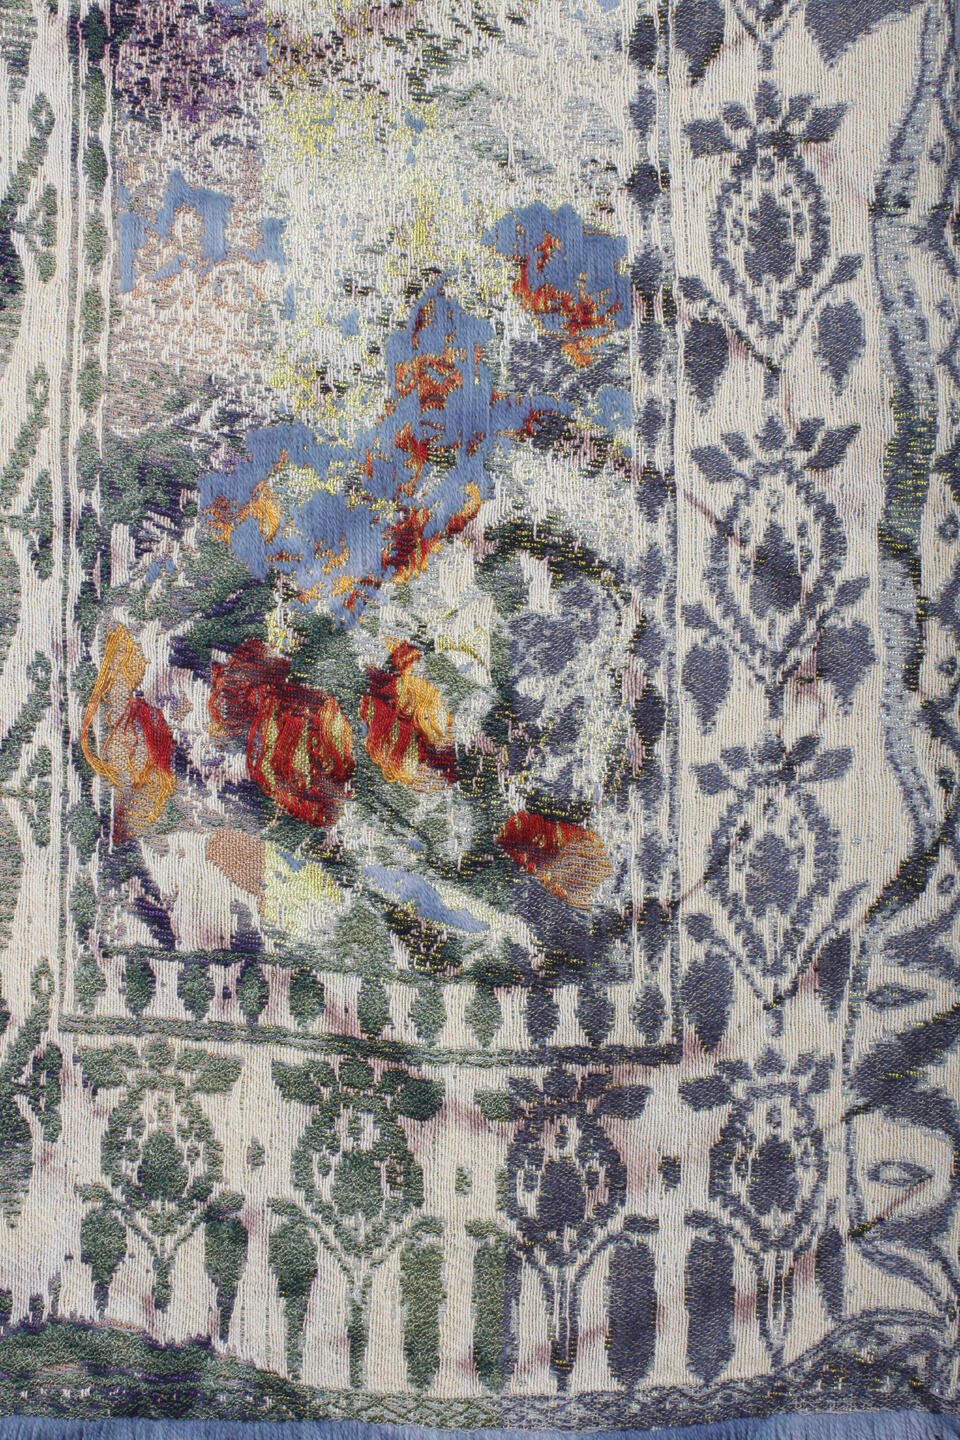 Close-up detail of a woven textile depicting an abstract floral pattern in a washed-out color palette.